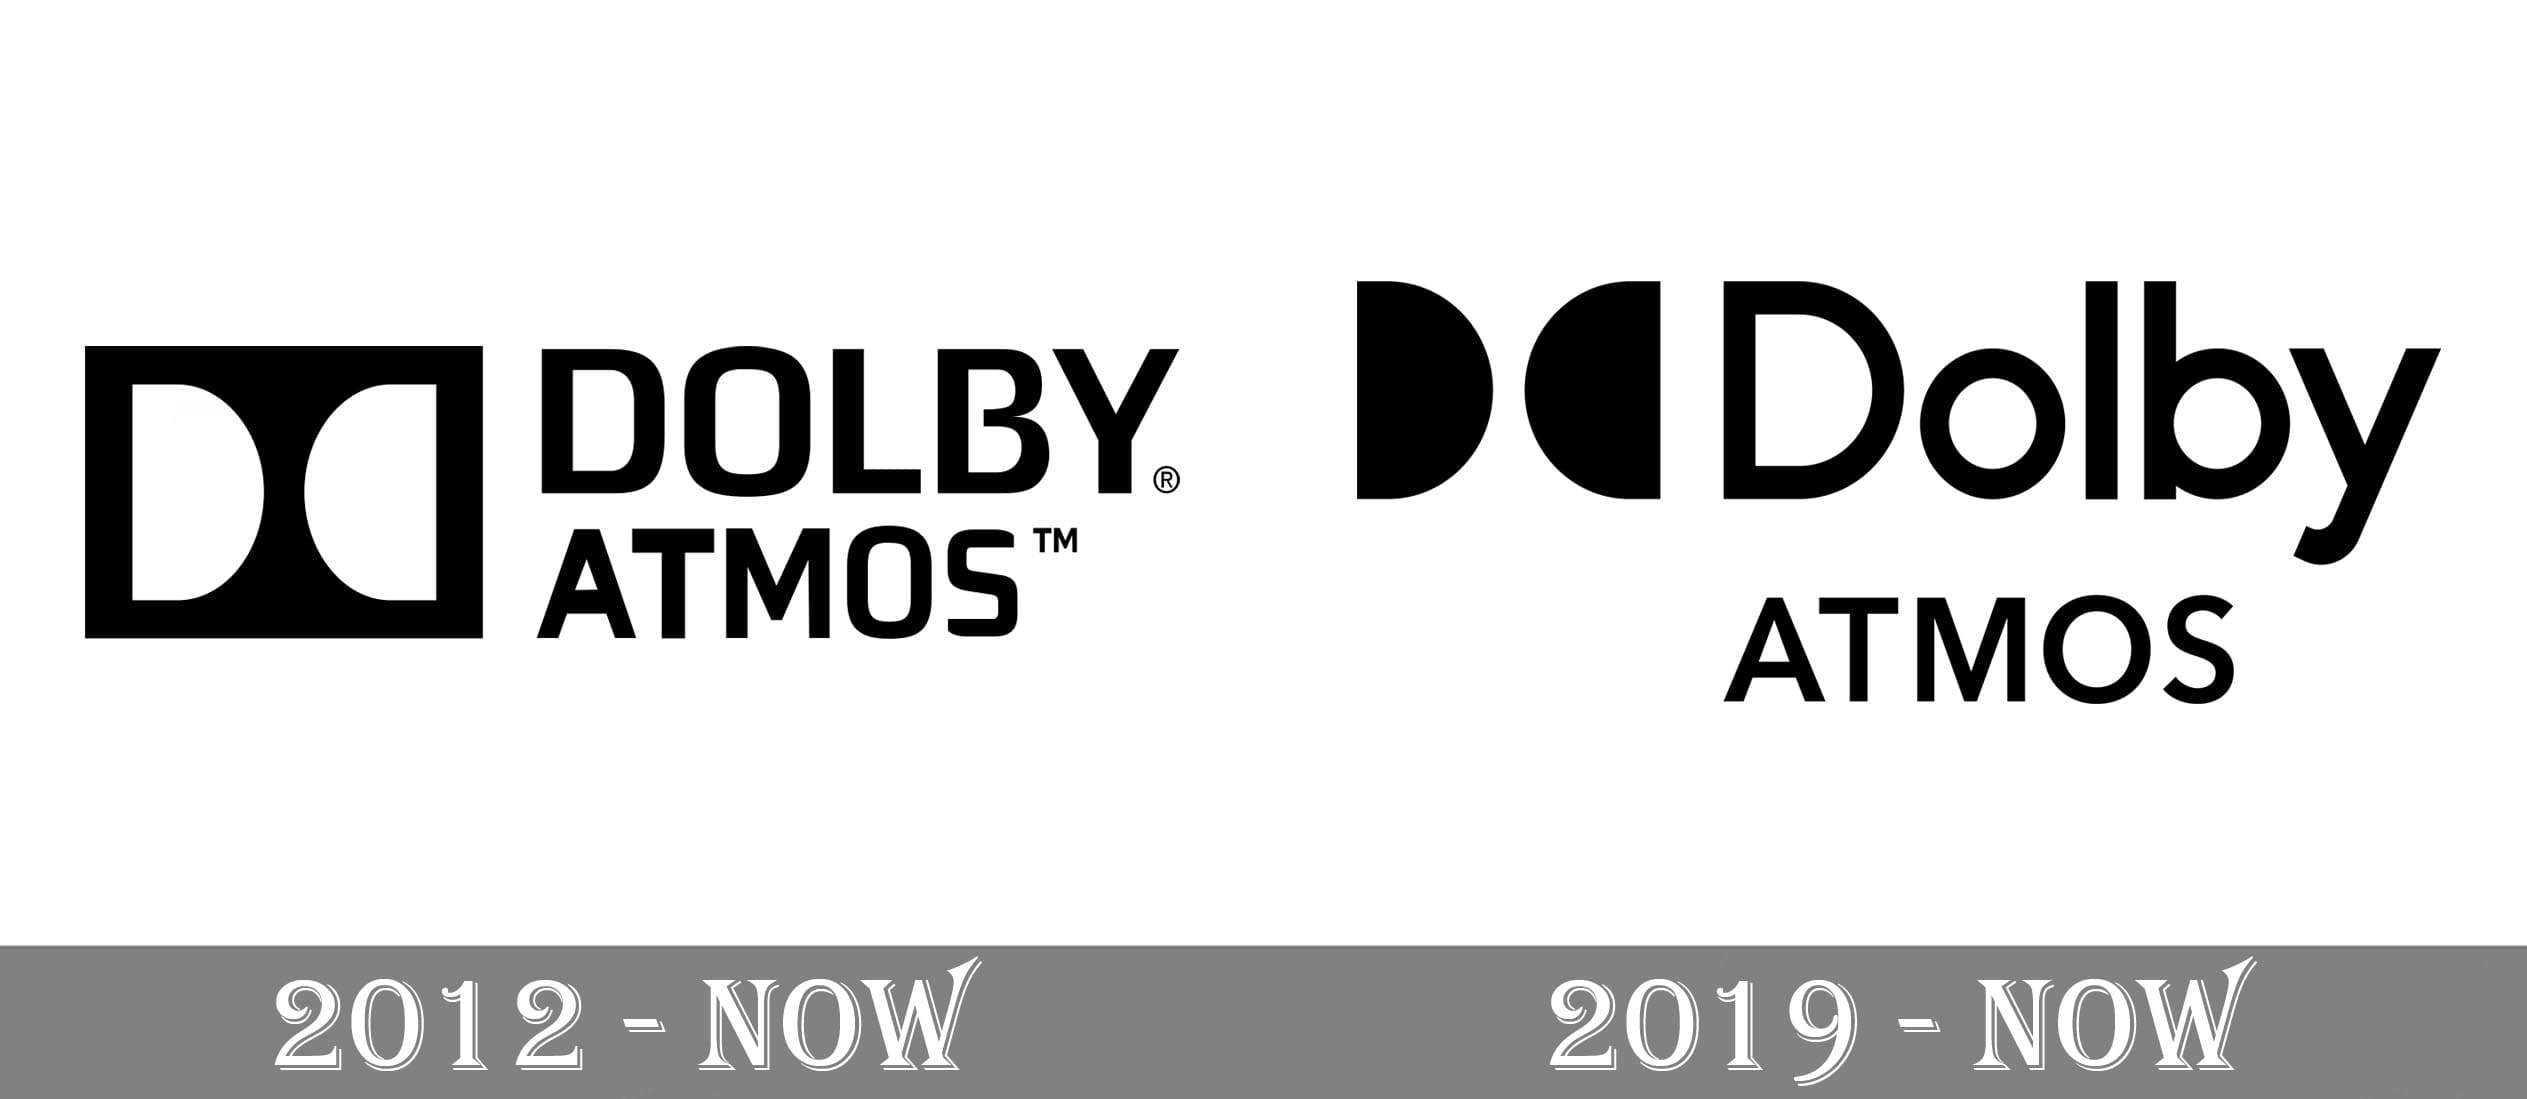 Dolby Atmos - Official Site - Dolby